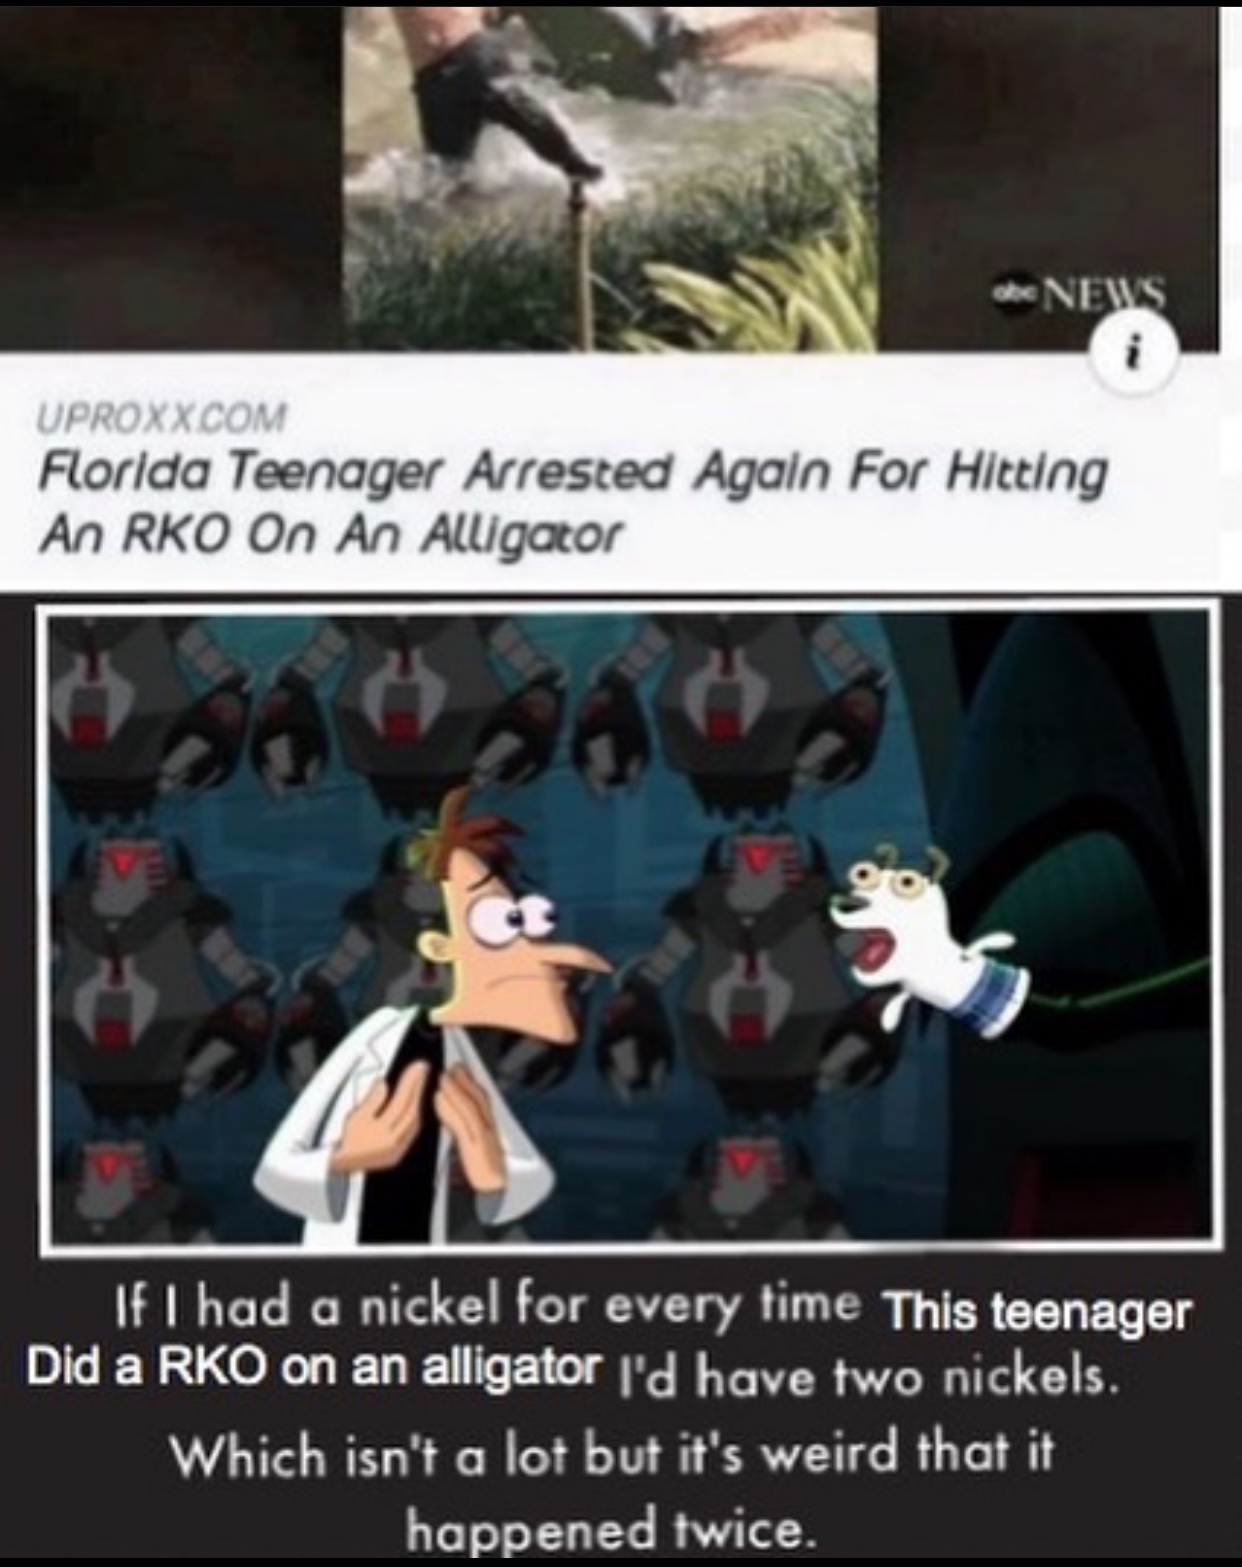 it’s cool that floridans are taught how to run away from alligators - meme